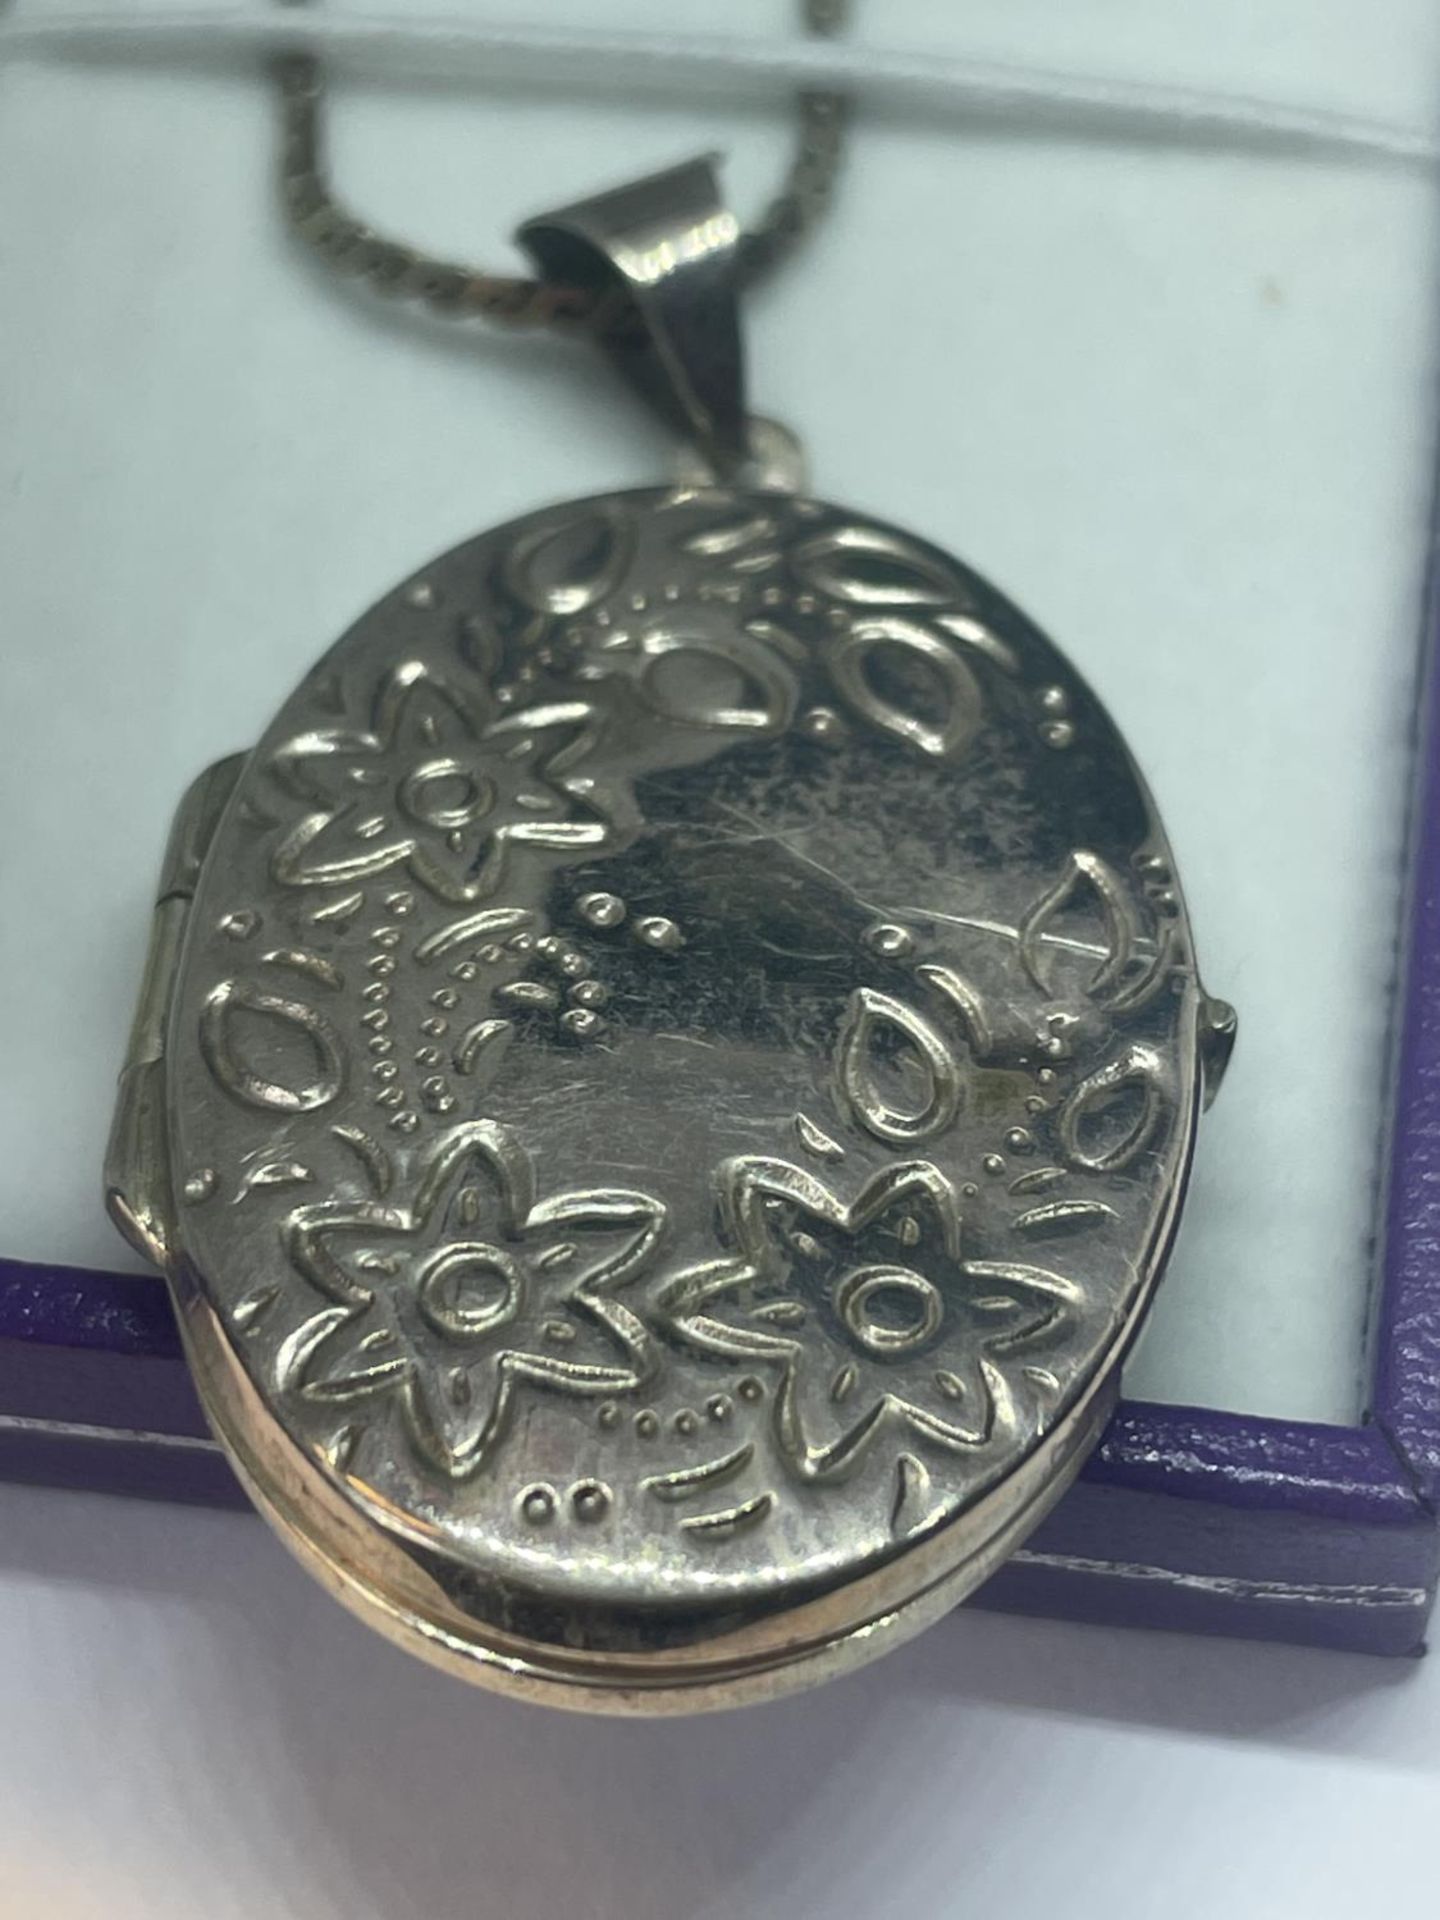 A MARKED SILVER NECKLACE WITH A LOCKET PENDANT IN A PRESENTATION BOX - Image 2 of 3